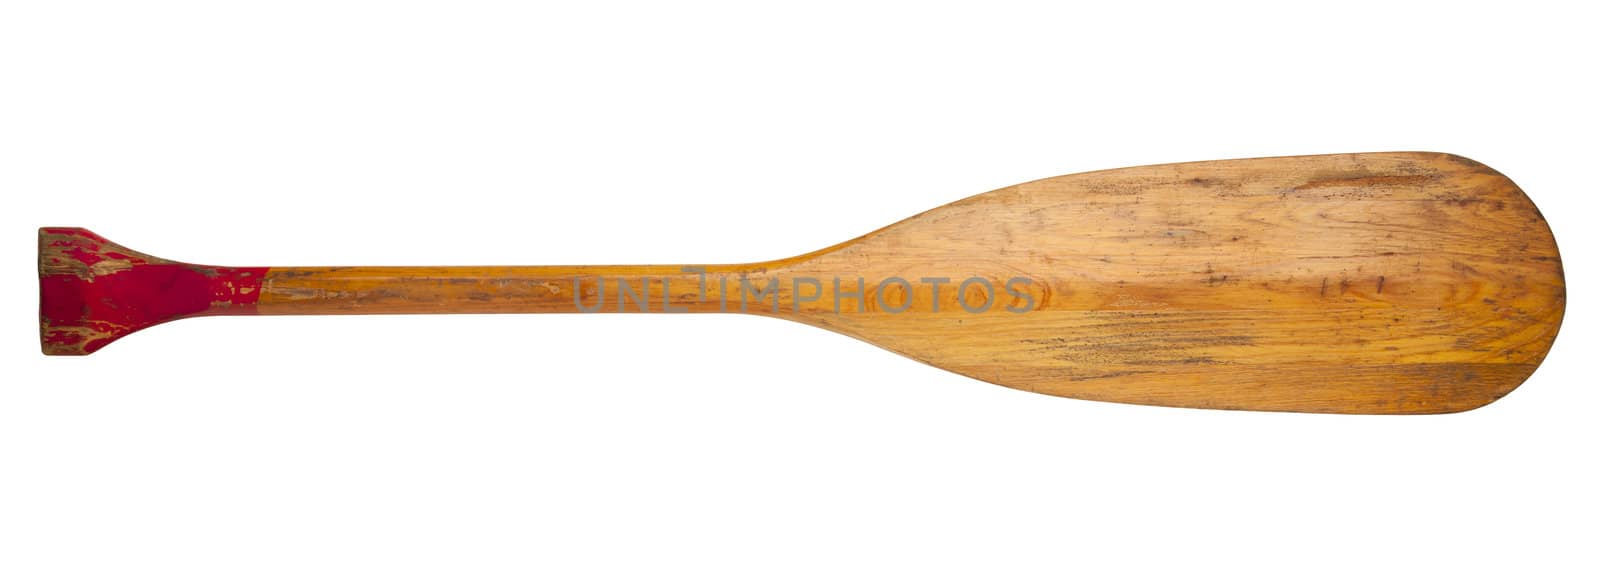 old canoe paddle by PixelsAway